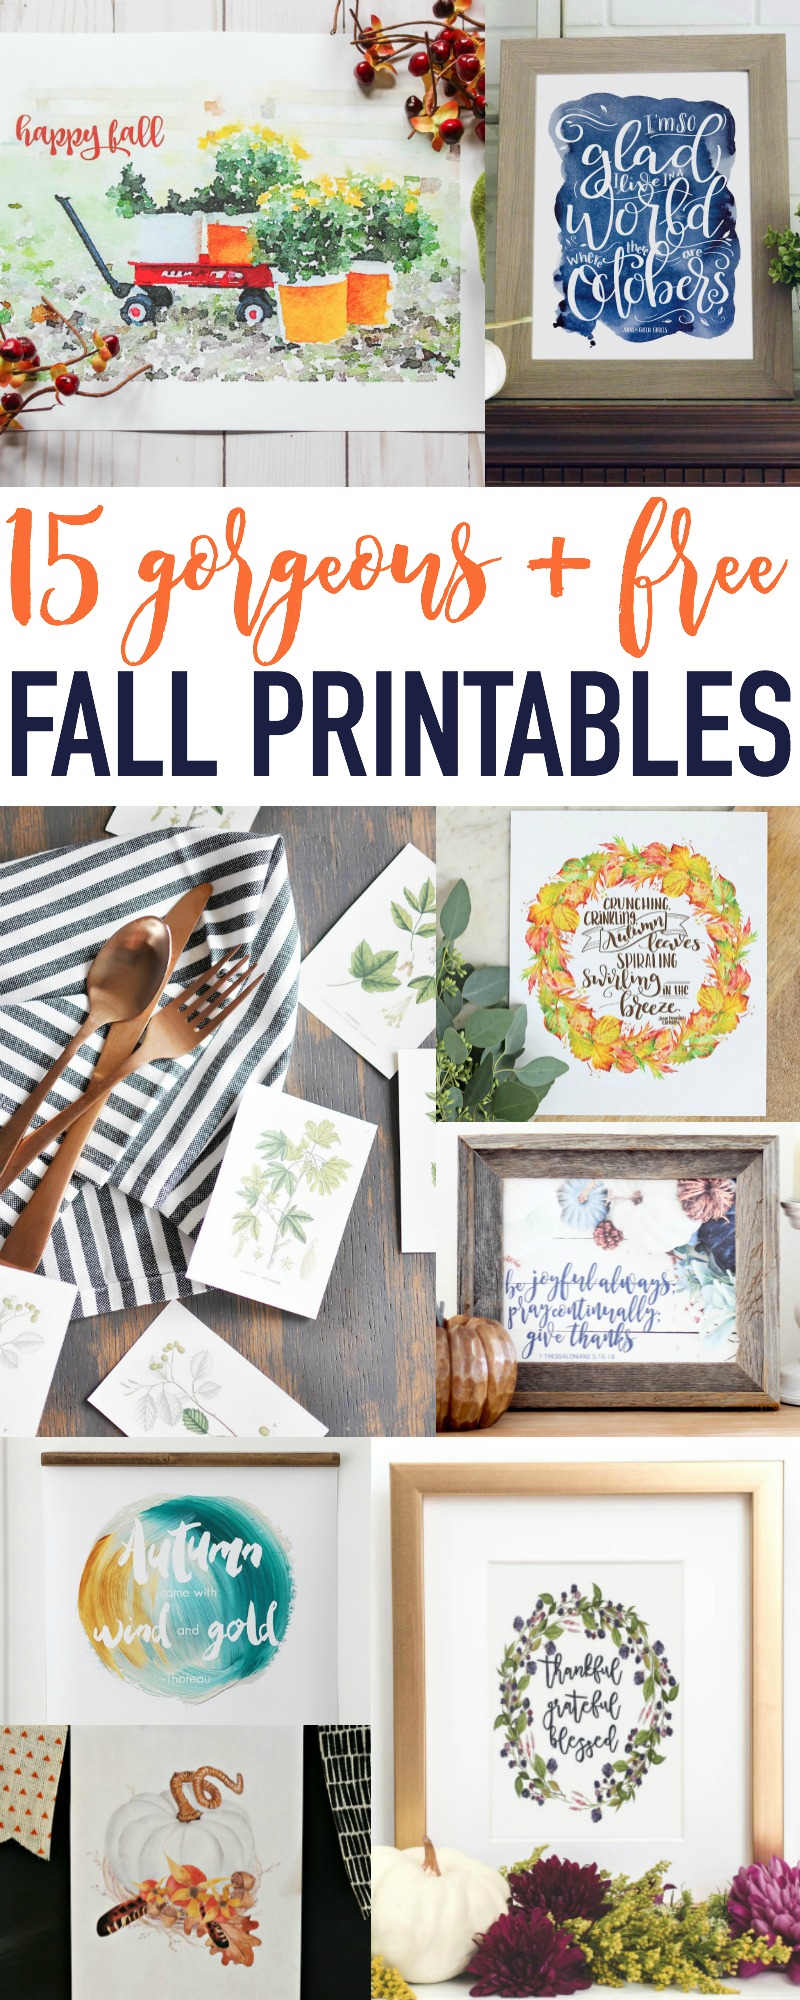 15 gorgeous and free fall printables.